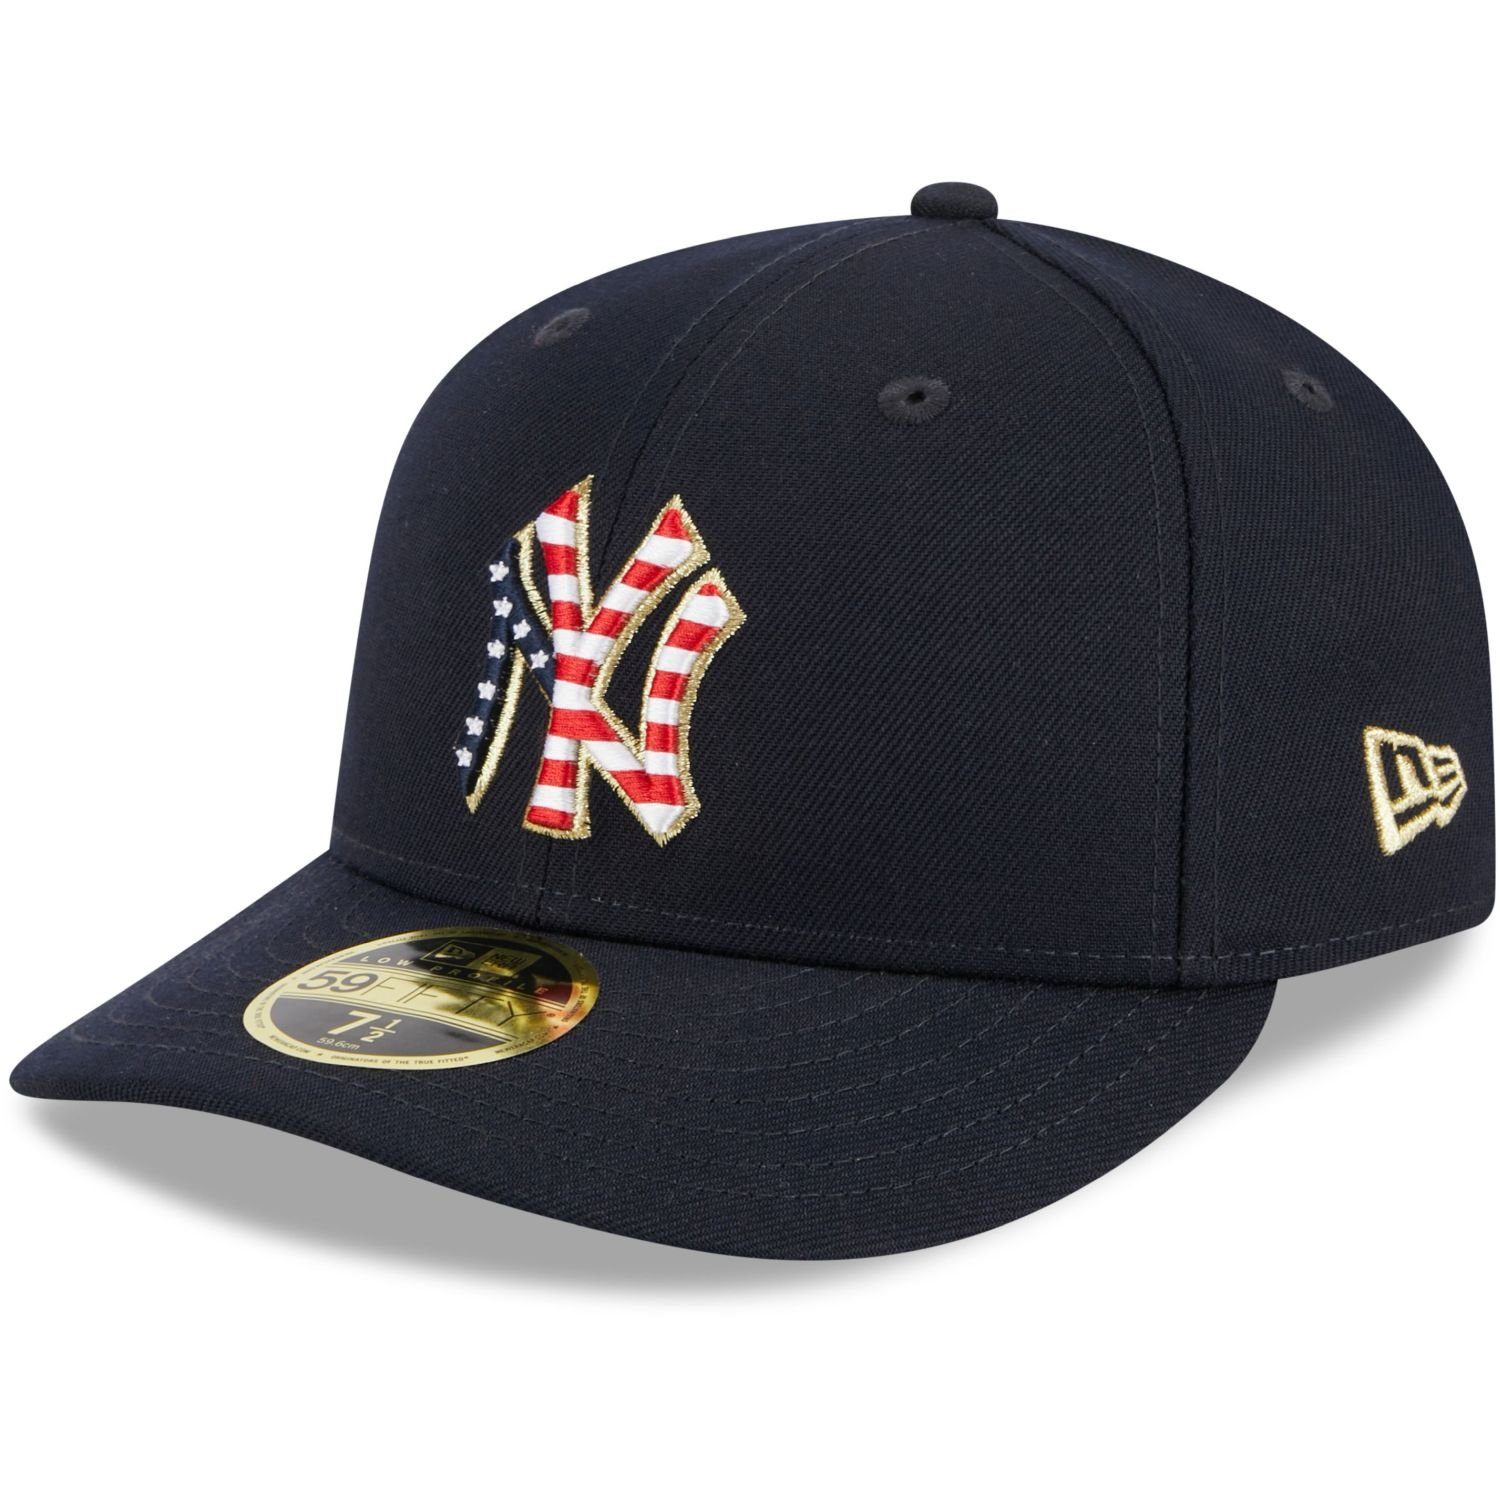 4TH York Fitted JULY Profile Era New Yankees New 59Fifty Low Cap